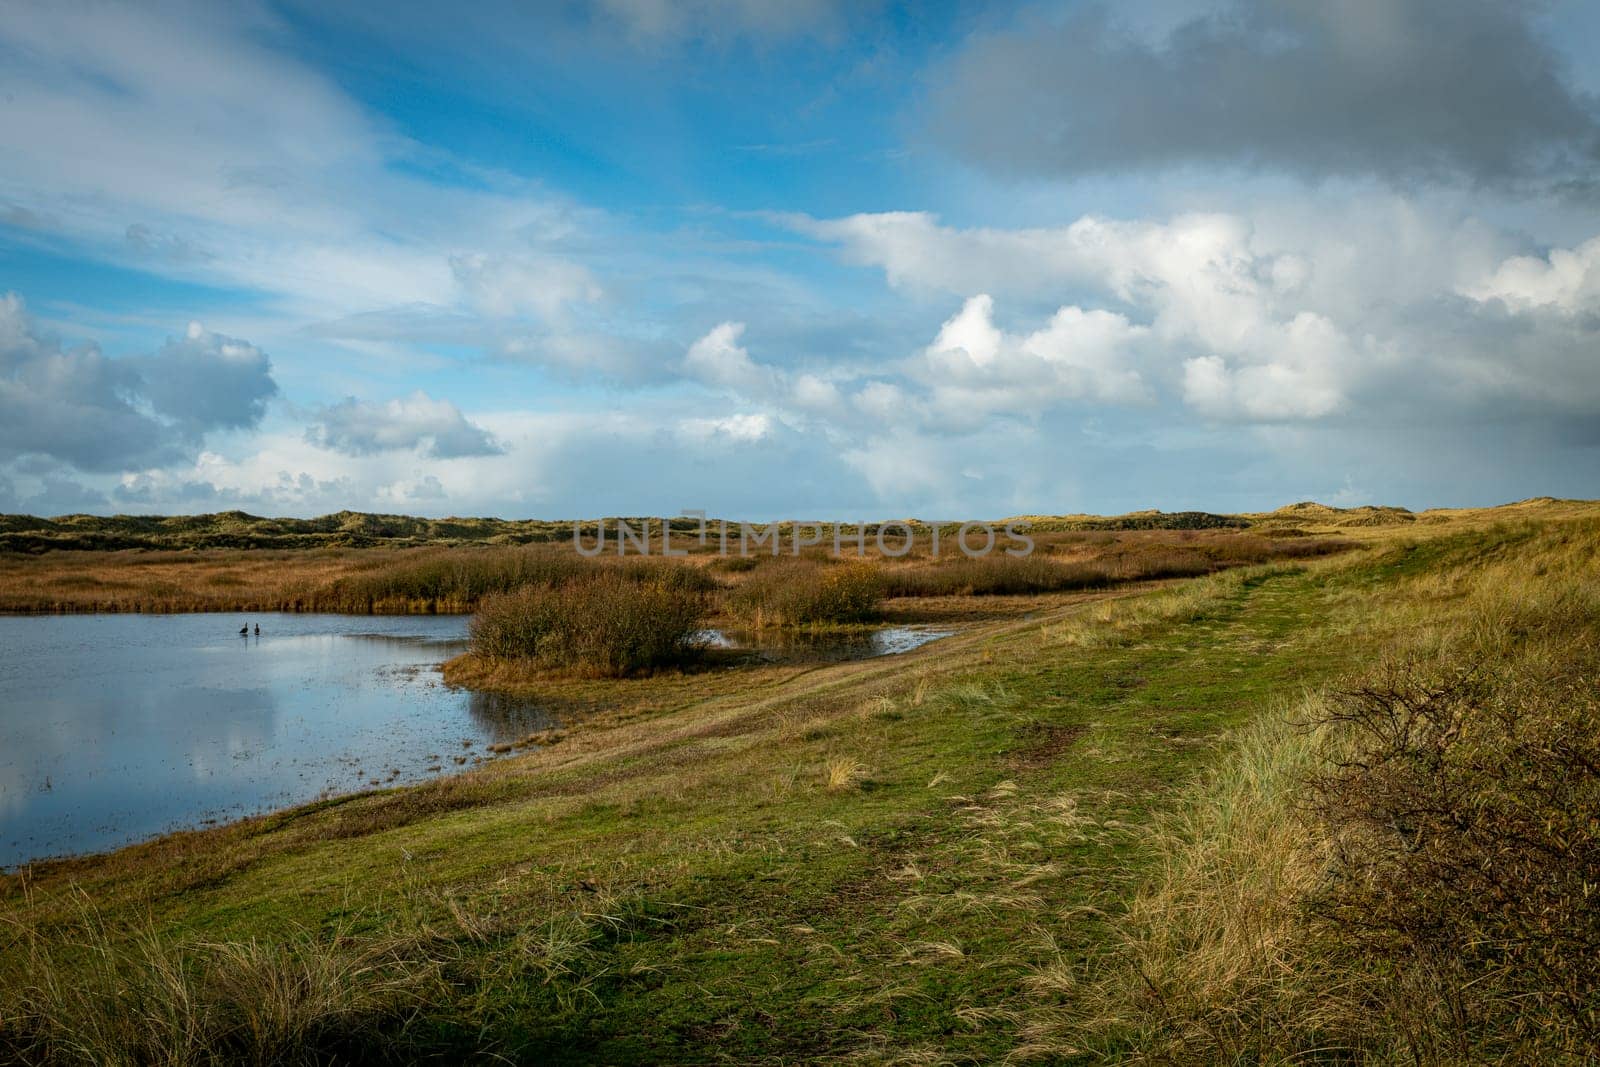 a freshwater lake in the dunes of the island of Texel with marram grass in the foreground and the dunes and sky in the background